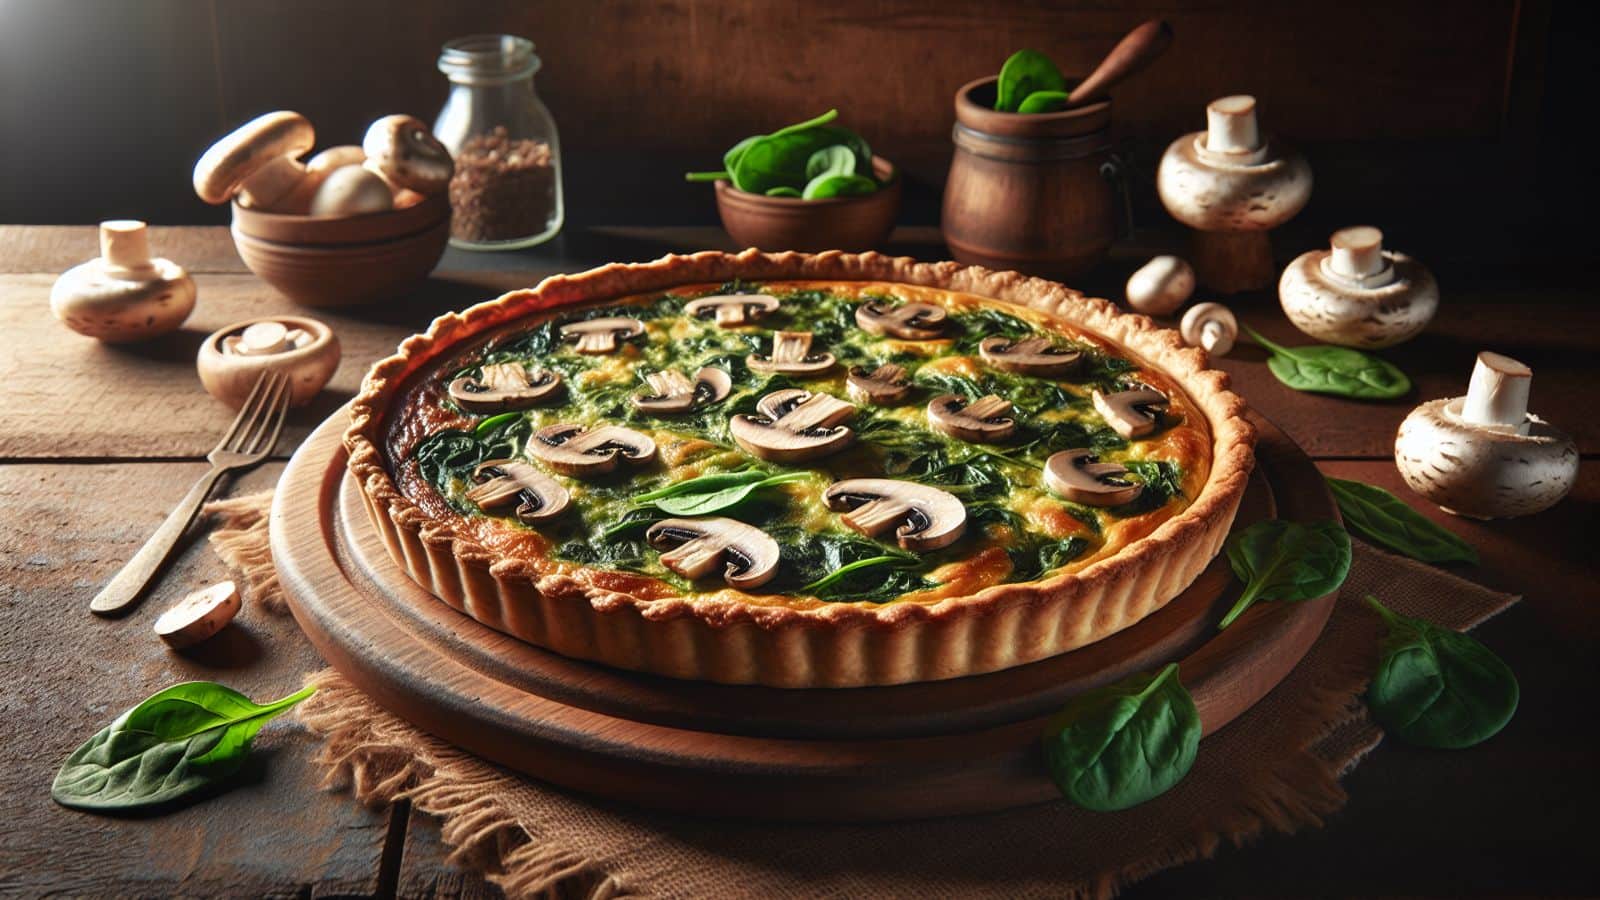 Guests coming over? Serve this savory spinach mushroom quiche